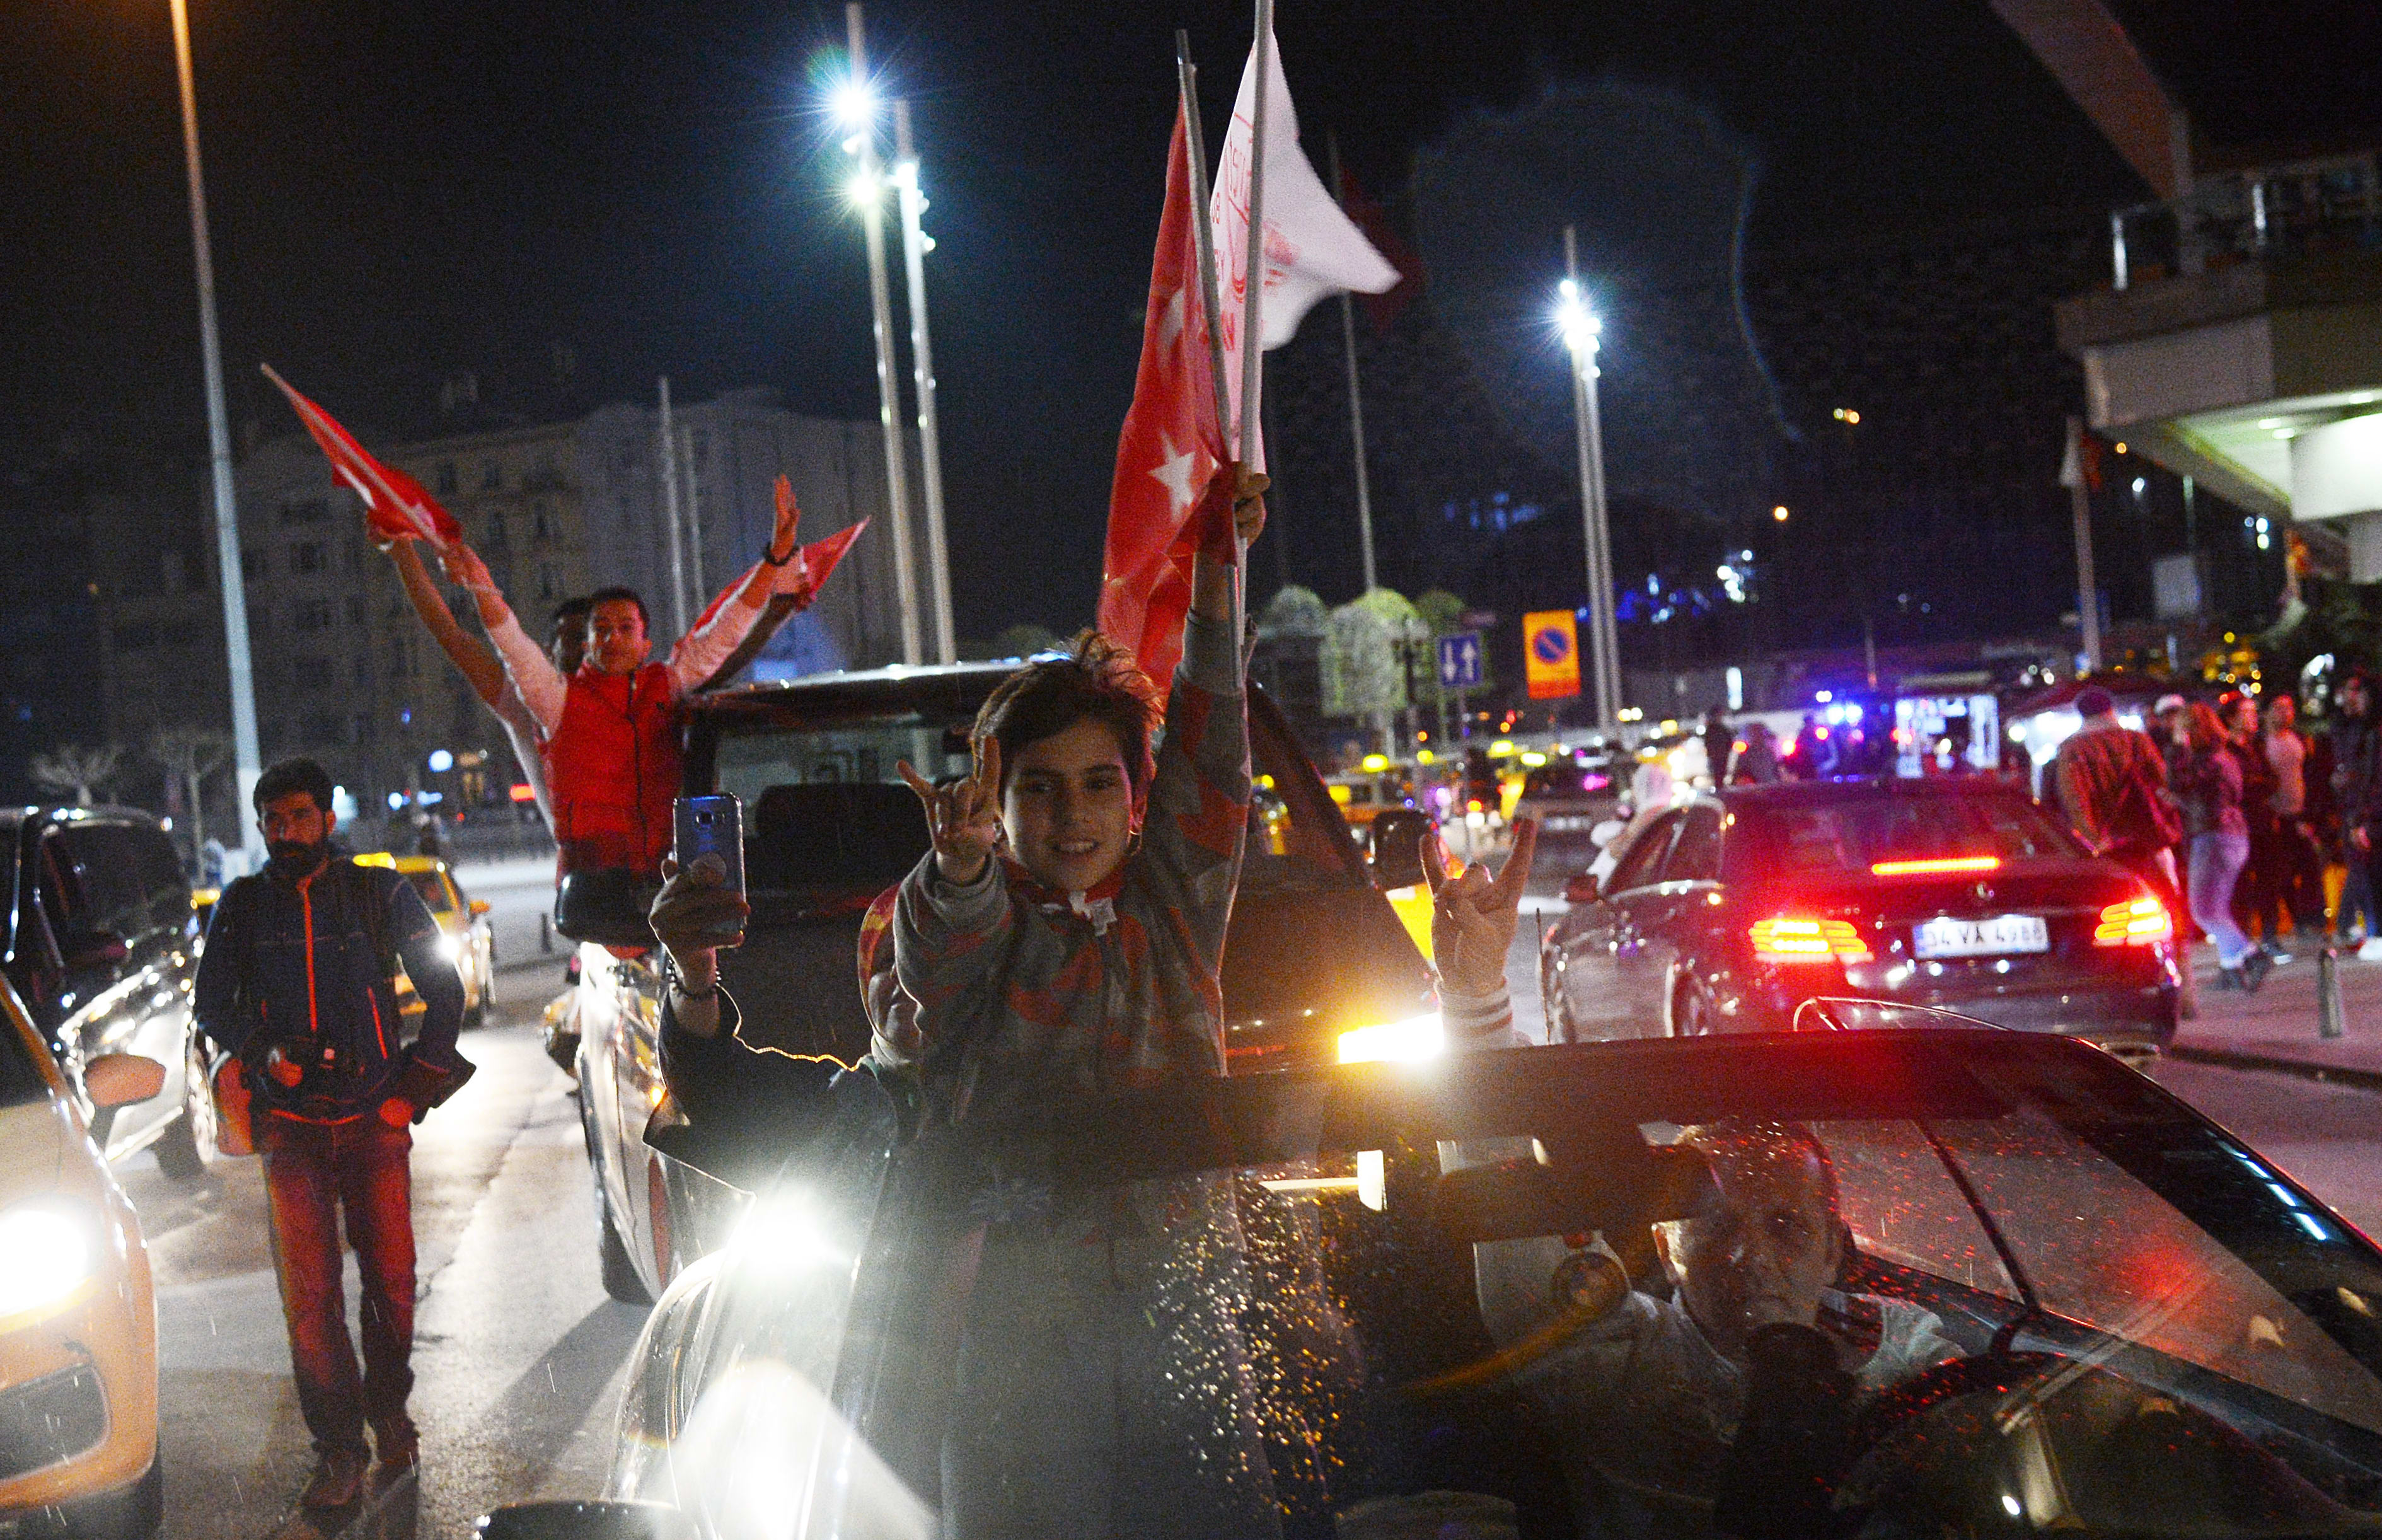 Supporters of Turkish President Tayyip Erdogan celebrate victory in the Turkey's constitutional referendum.